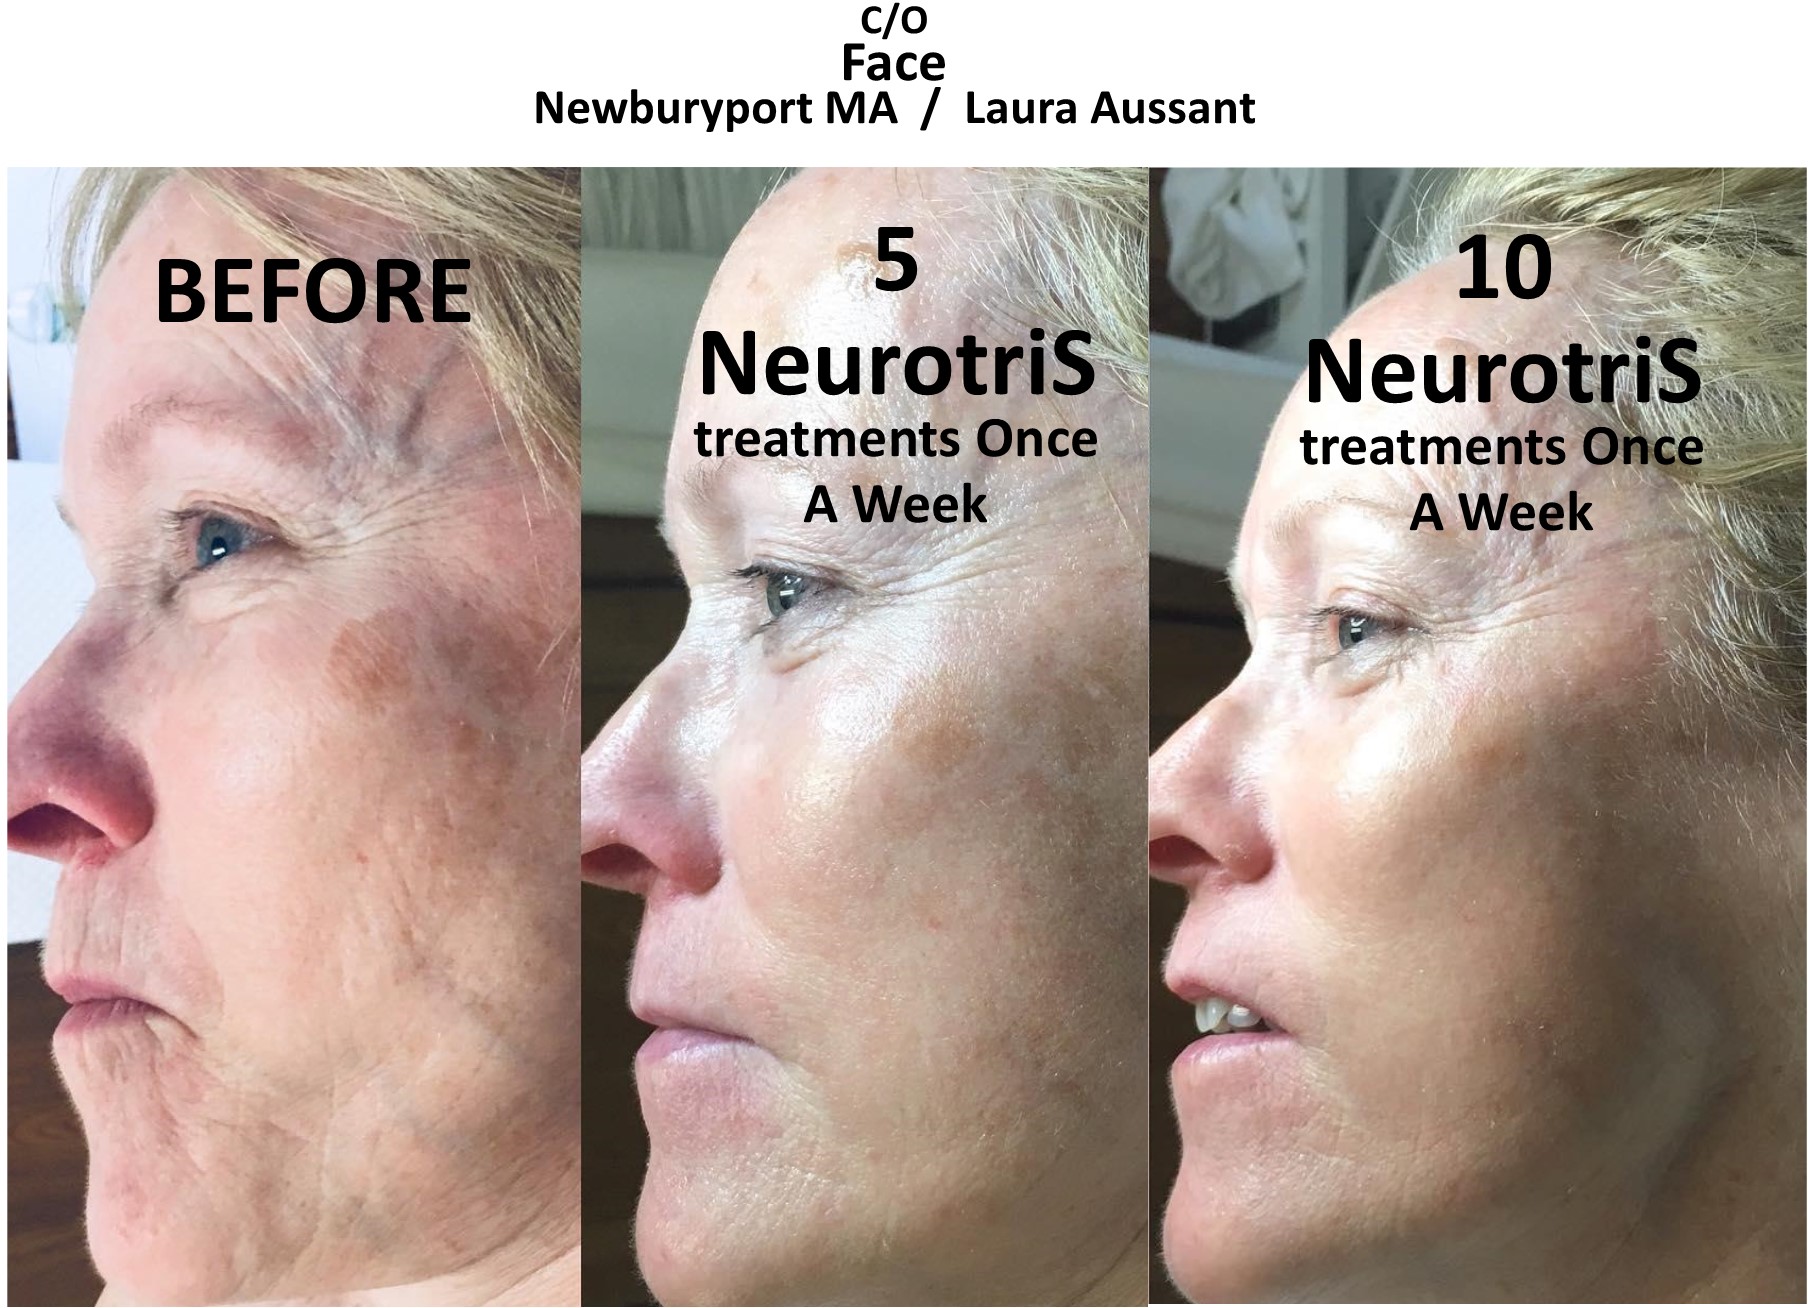 Neurotris-FACES-Before-After